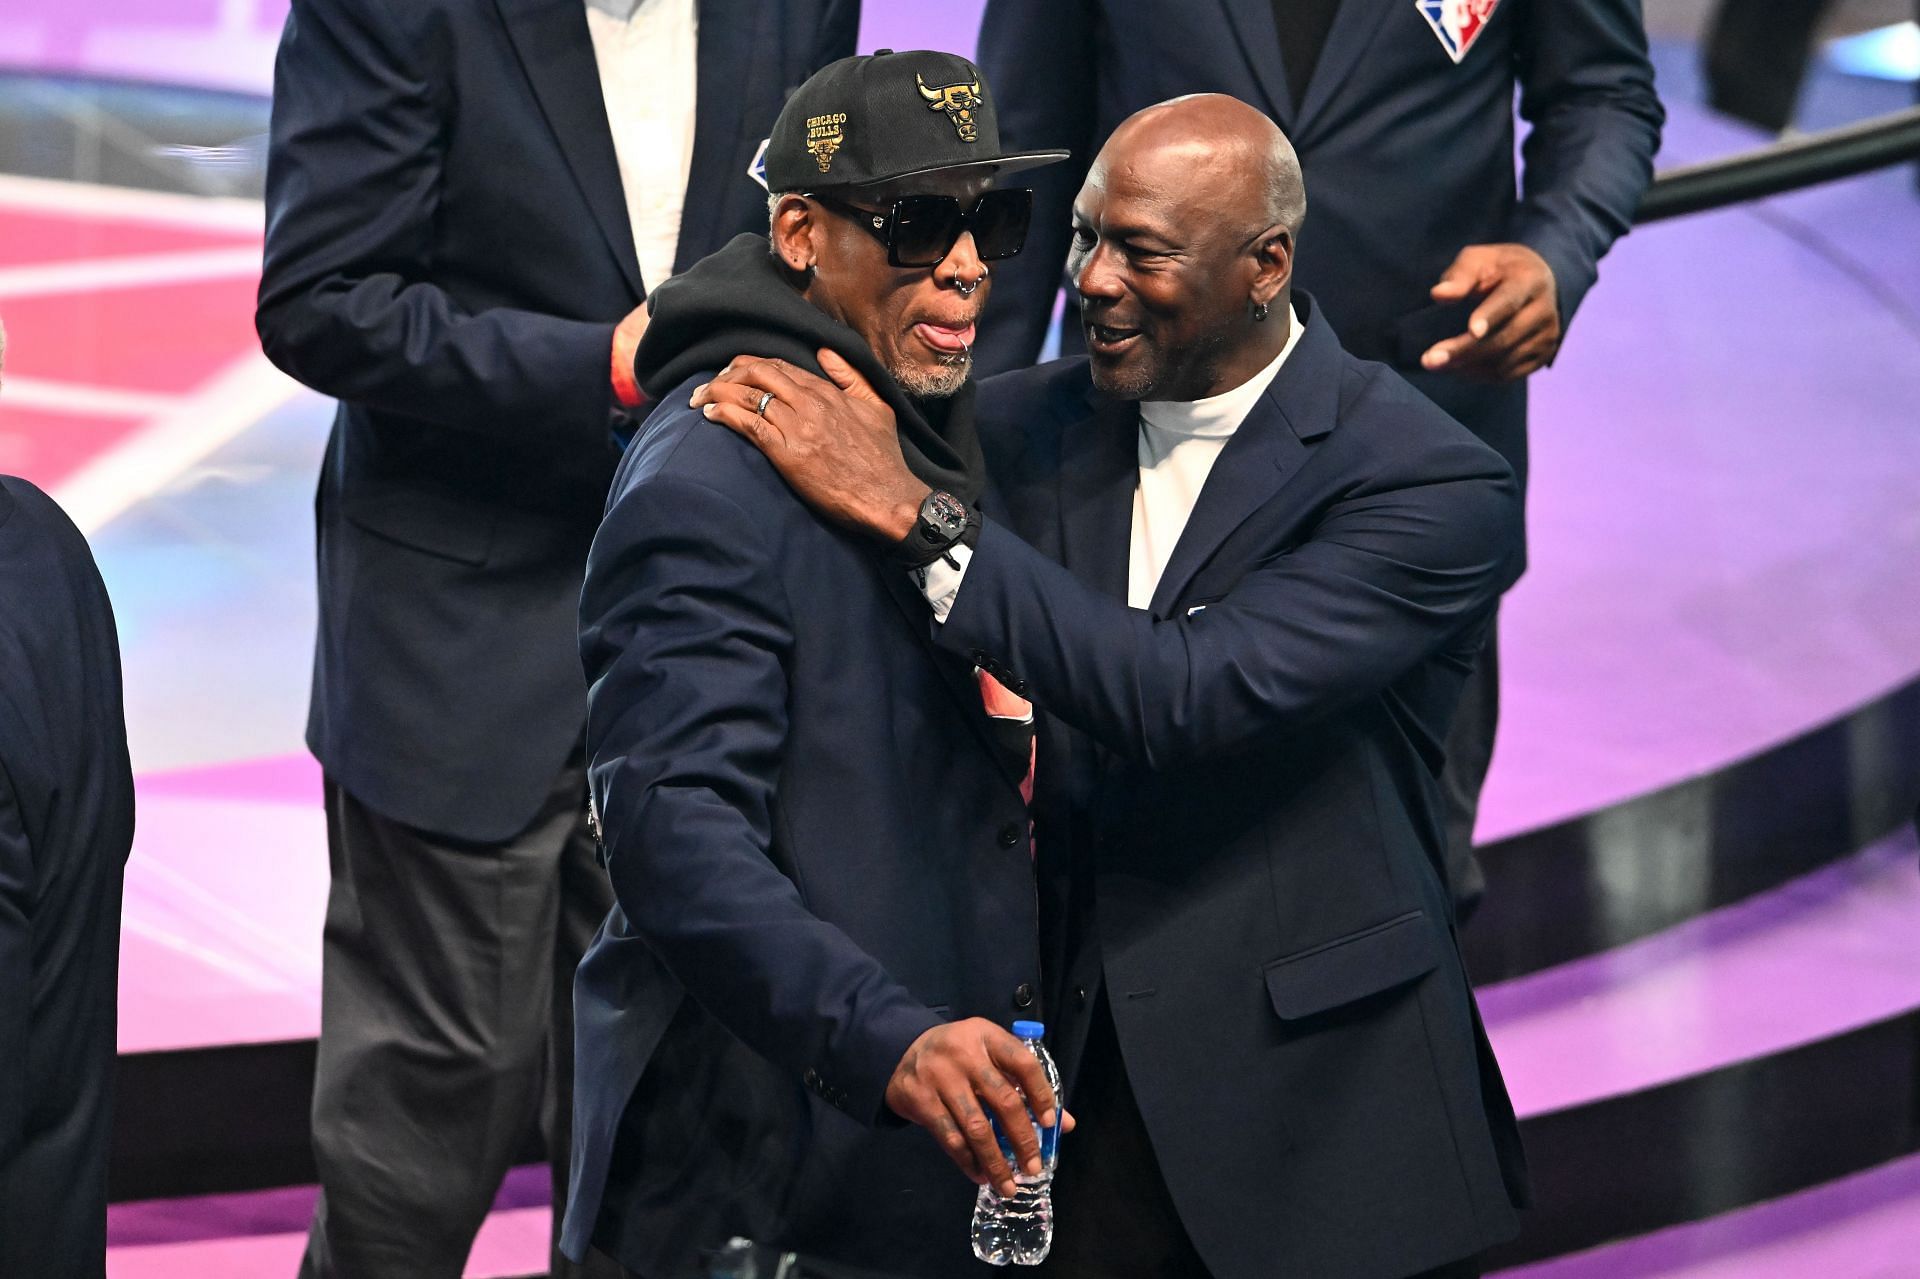 One of the biggest NBA trades sent Rodman to the Bulls (Image via Getty Images)